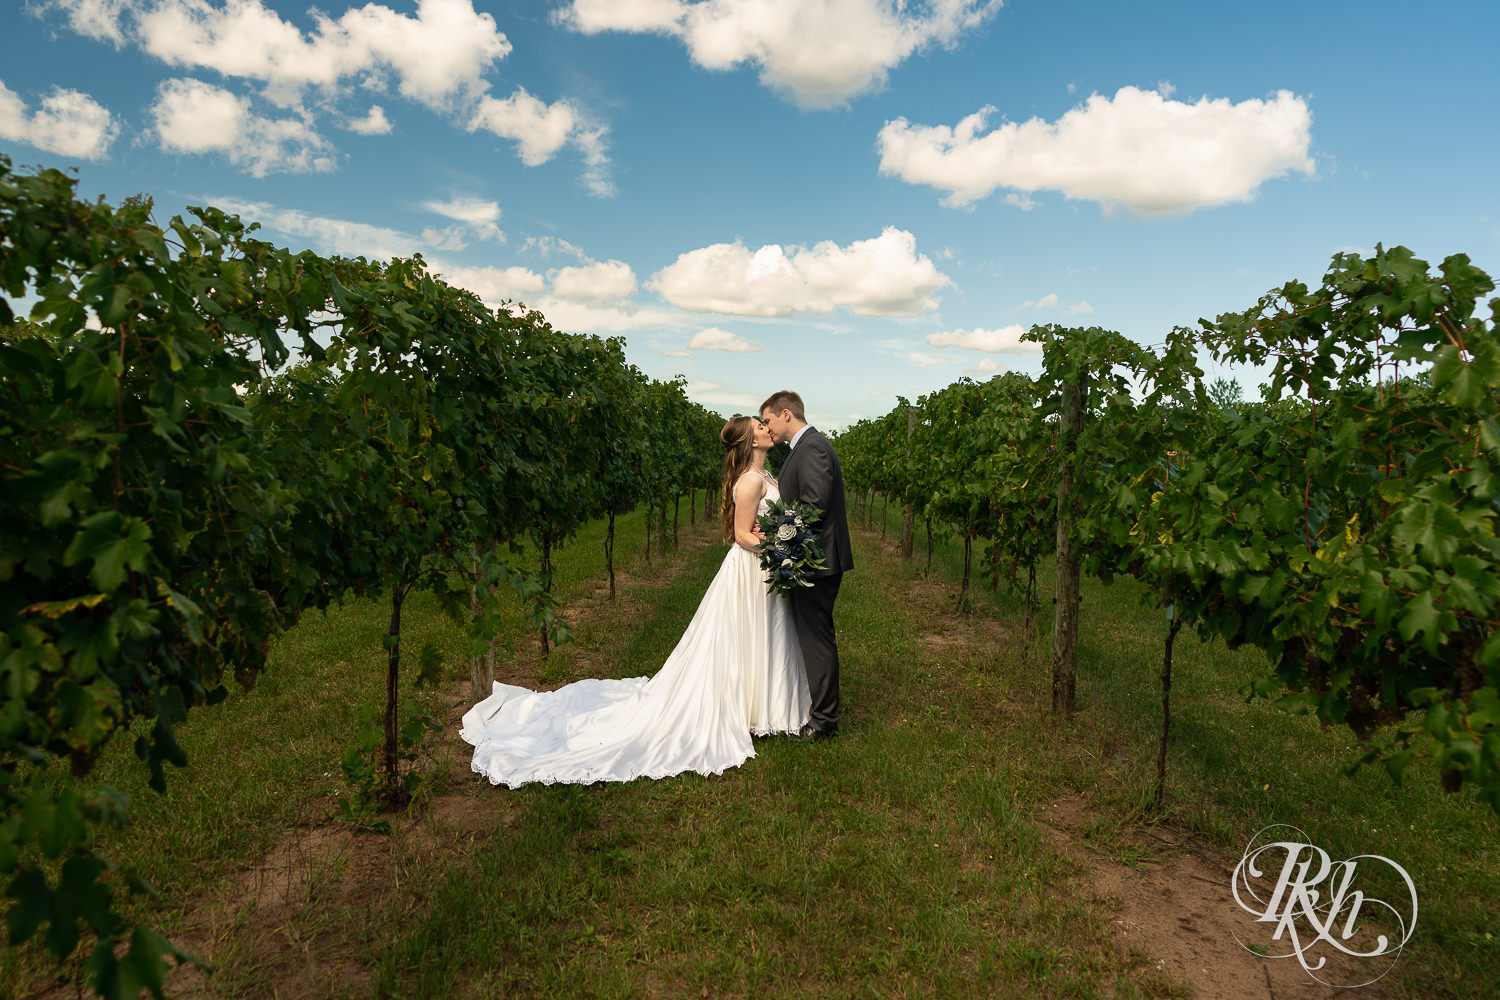 Bride and groom at a summer wedding kissing in the middle of a vineyard.